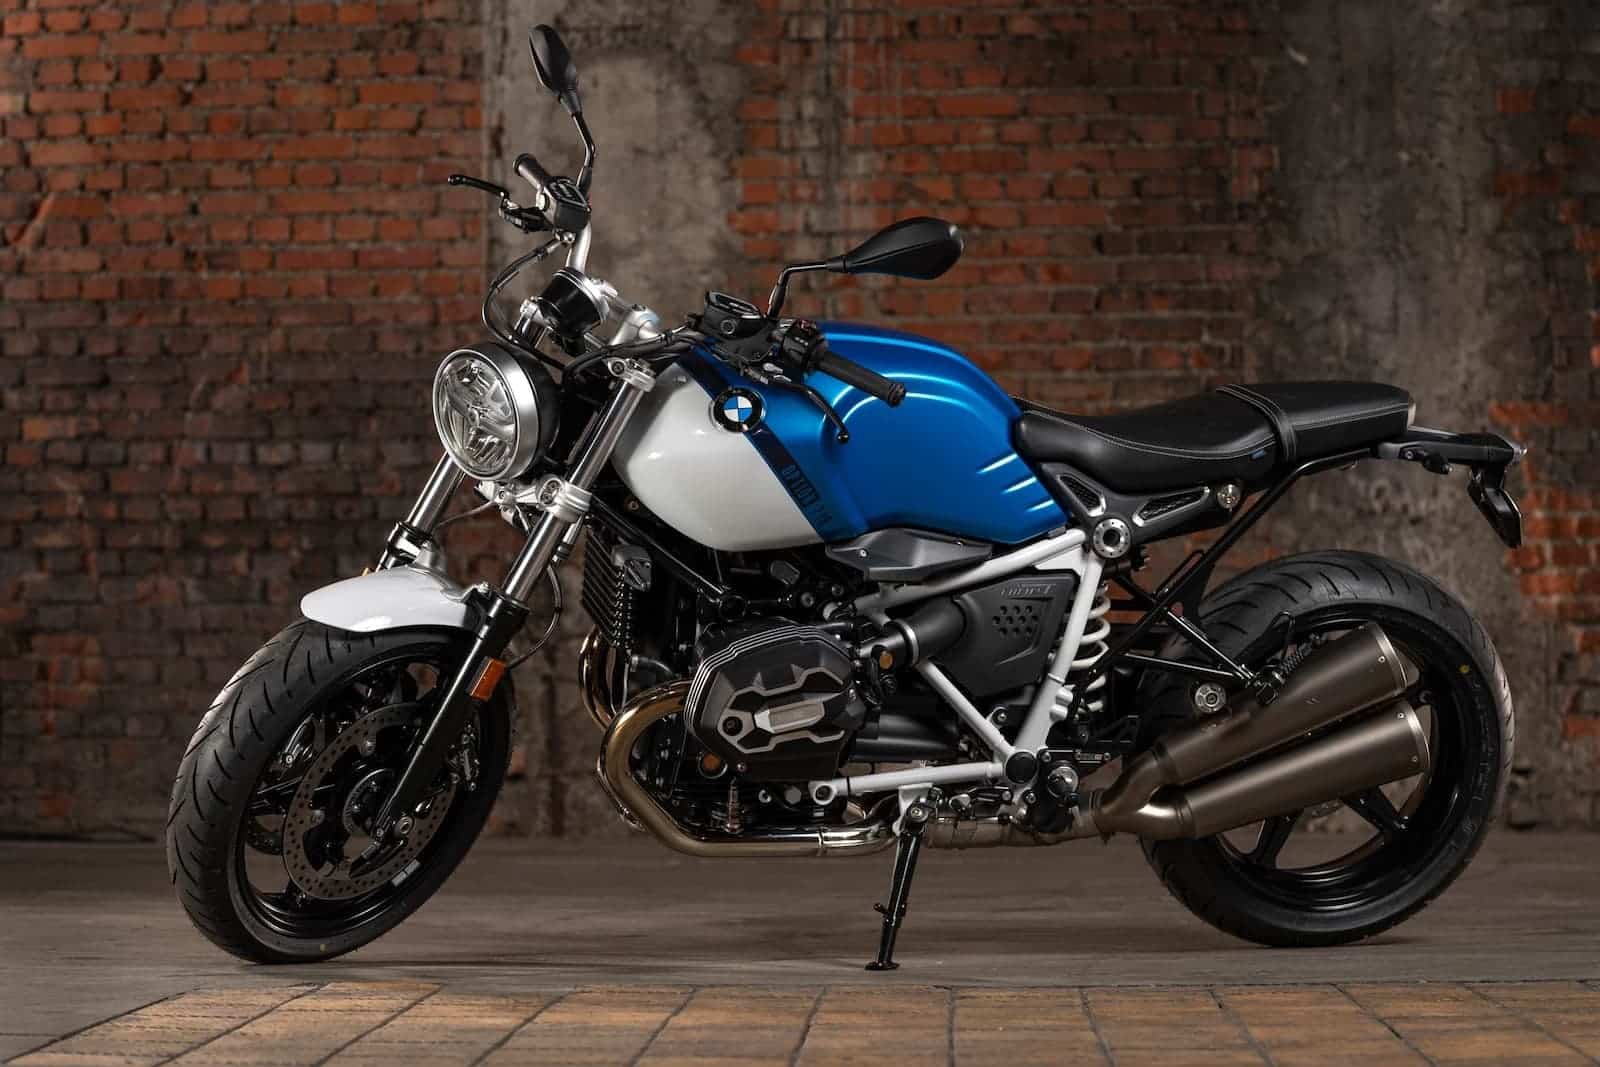 2021 BMW R nineT Pure in front of brick wall